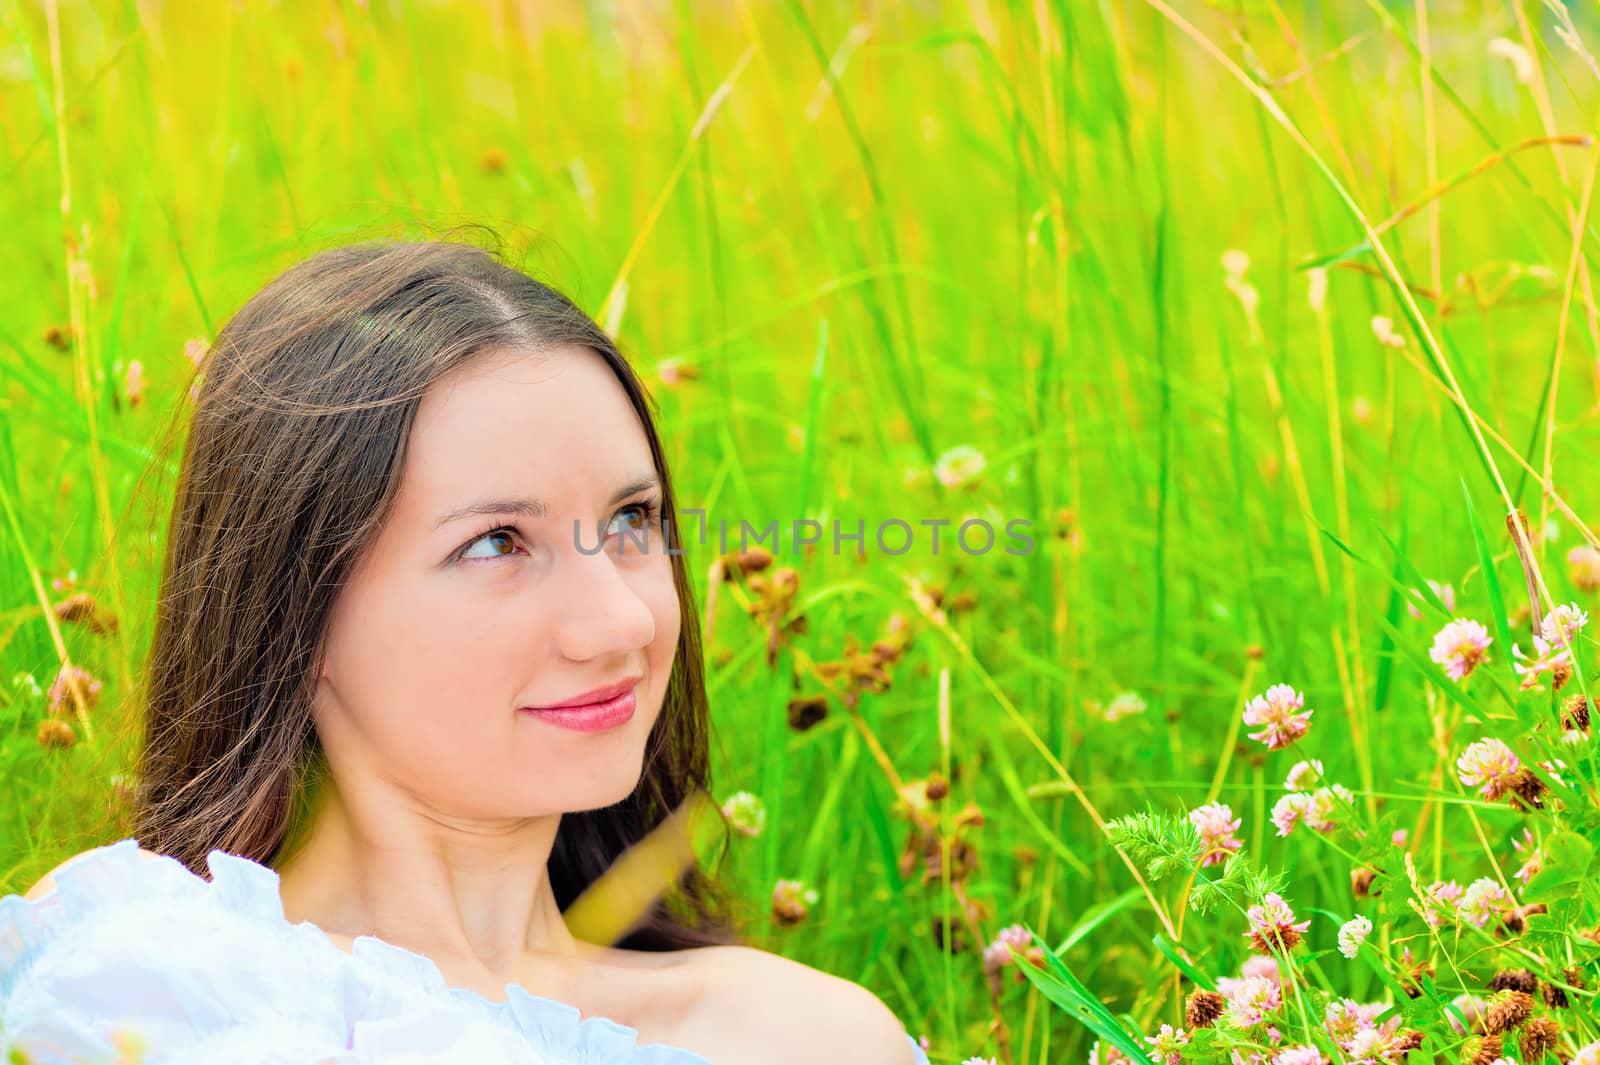 portrait of a girl in green grass and clover by kosmsos111